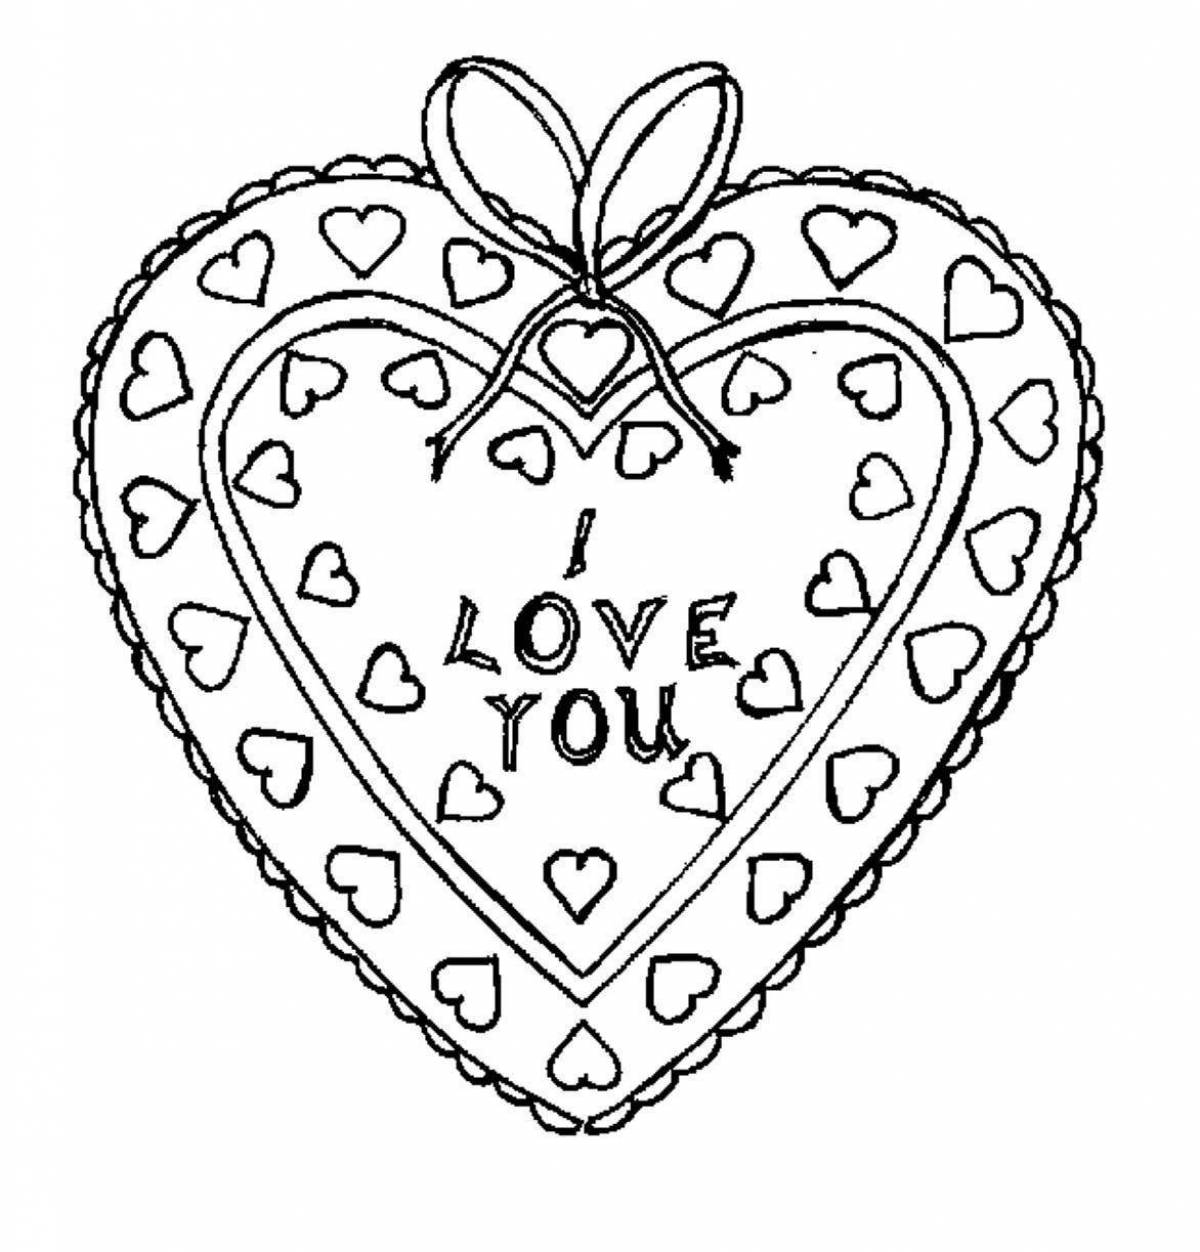 Coloring book with cute valentines